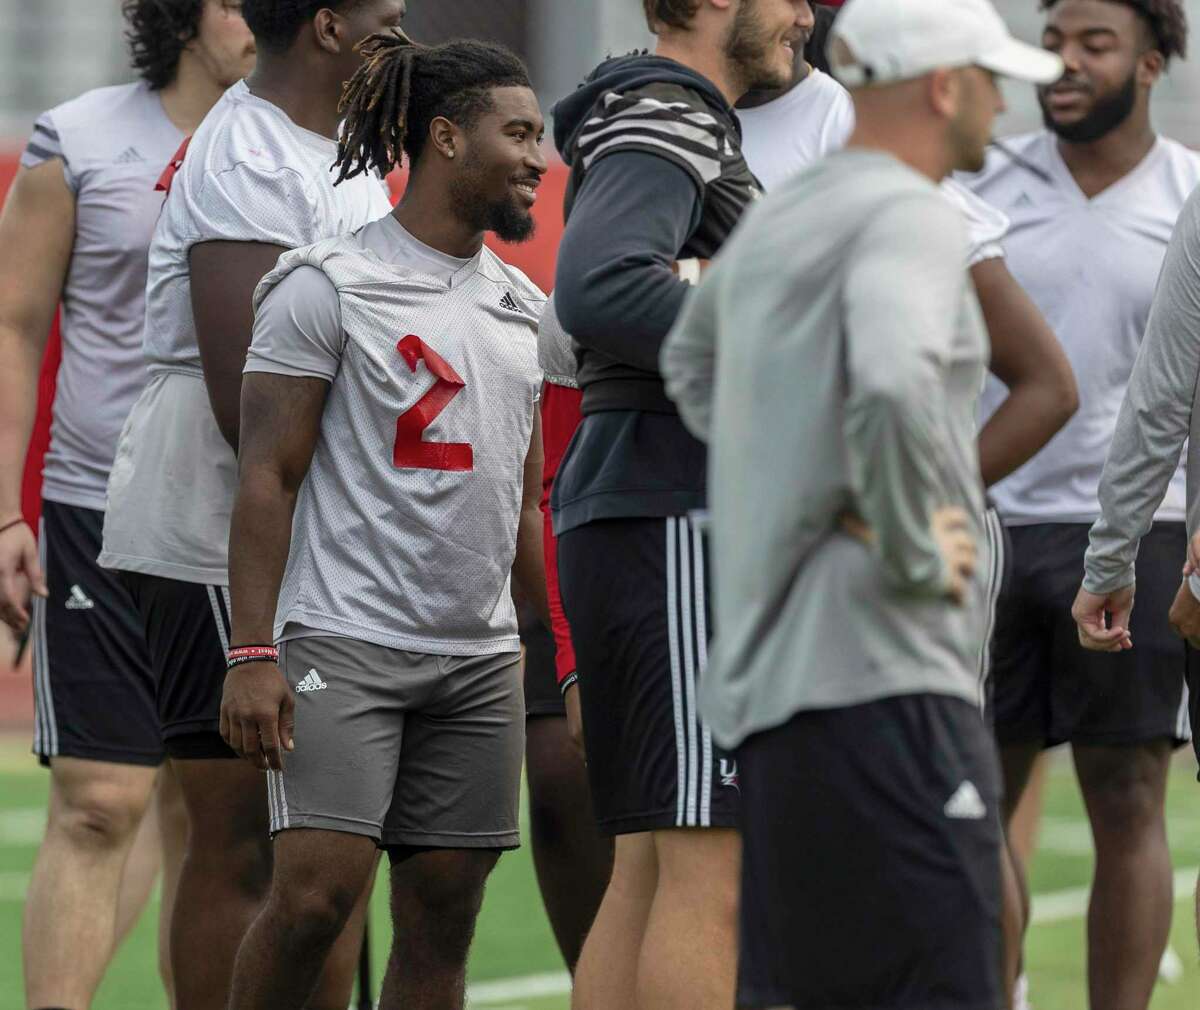 UIW’s Jarrell Wiley talks with teammates Thursday morning, Sept. 15, 2022, during the Cardinals’ practice in advance of their Saturday matchup against Prairie View A&M.